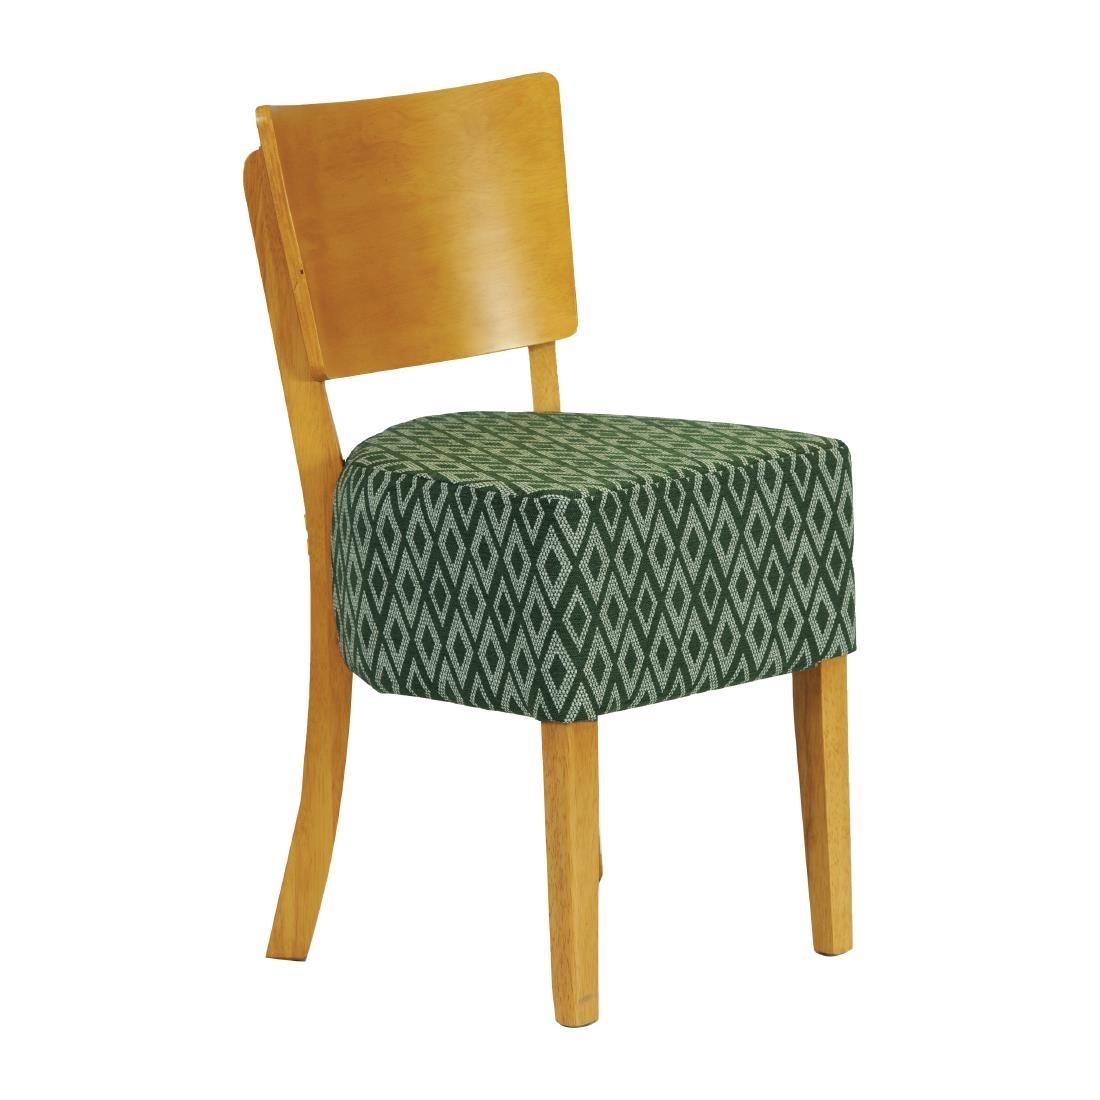 Asti Padded Soft Oak Dining Chair with Green Diamond Deep Padded Seat and Back (Pack of 2) - FT427  - 1